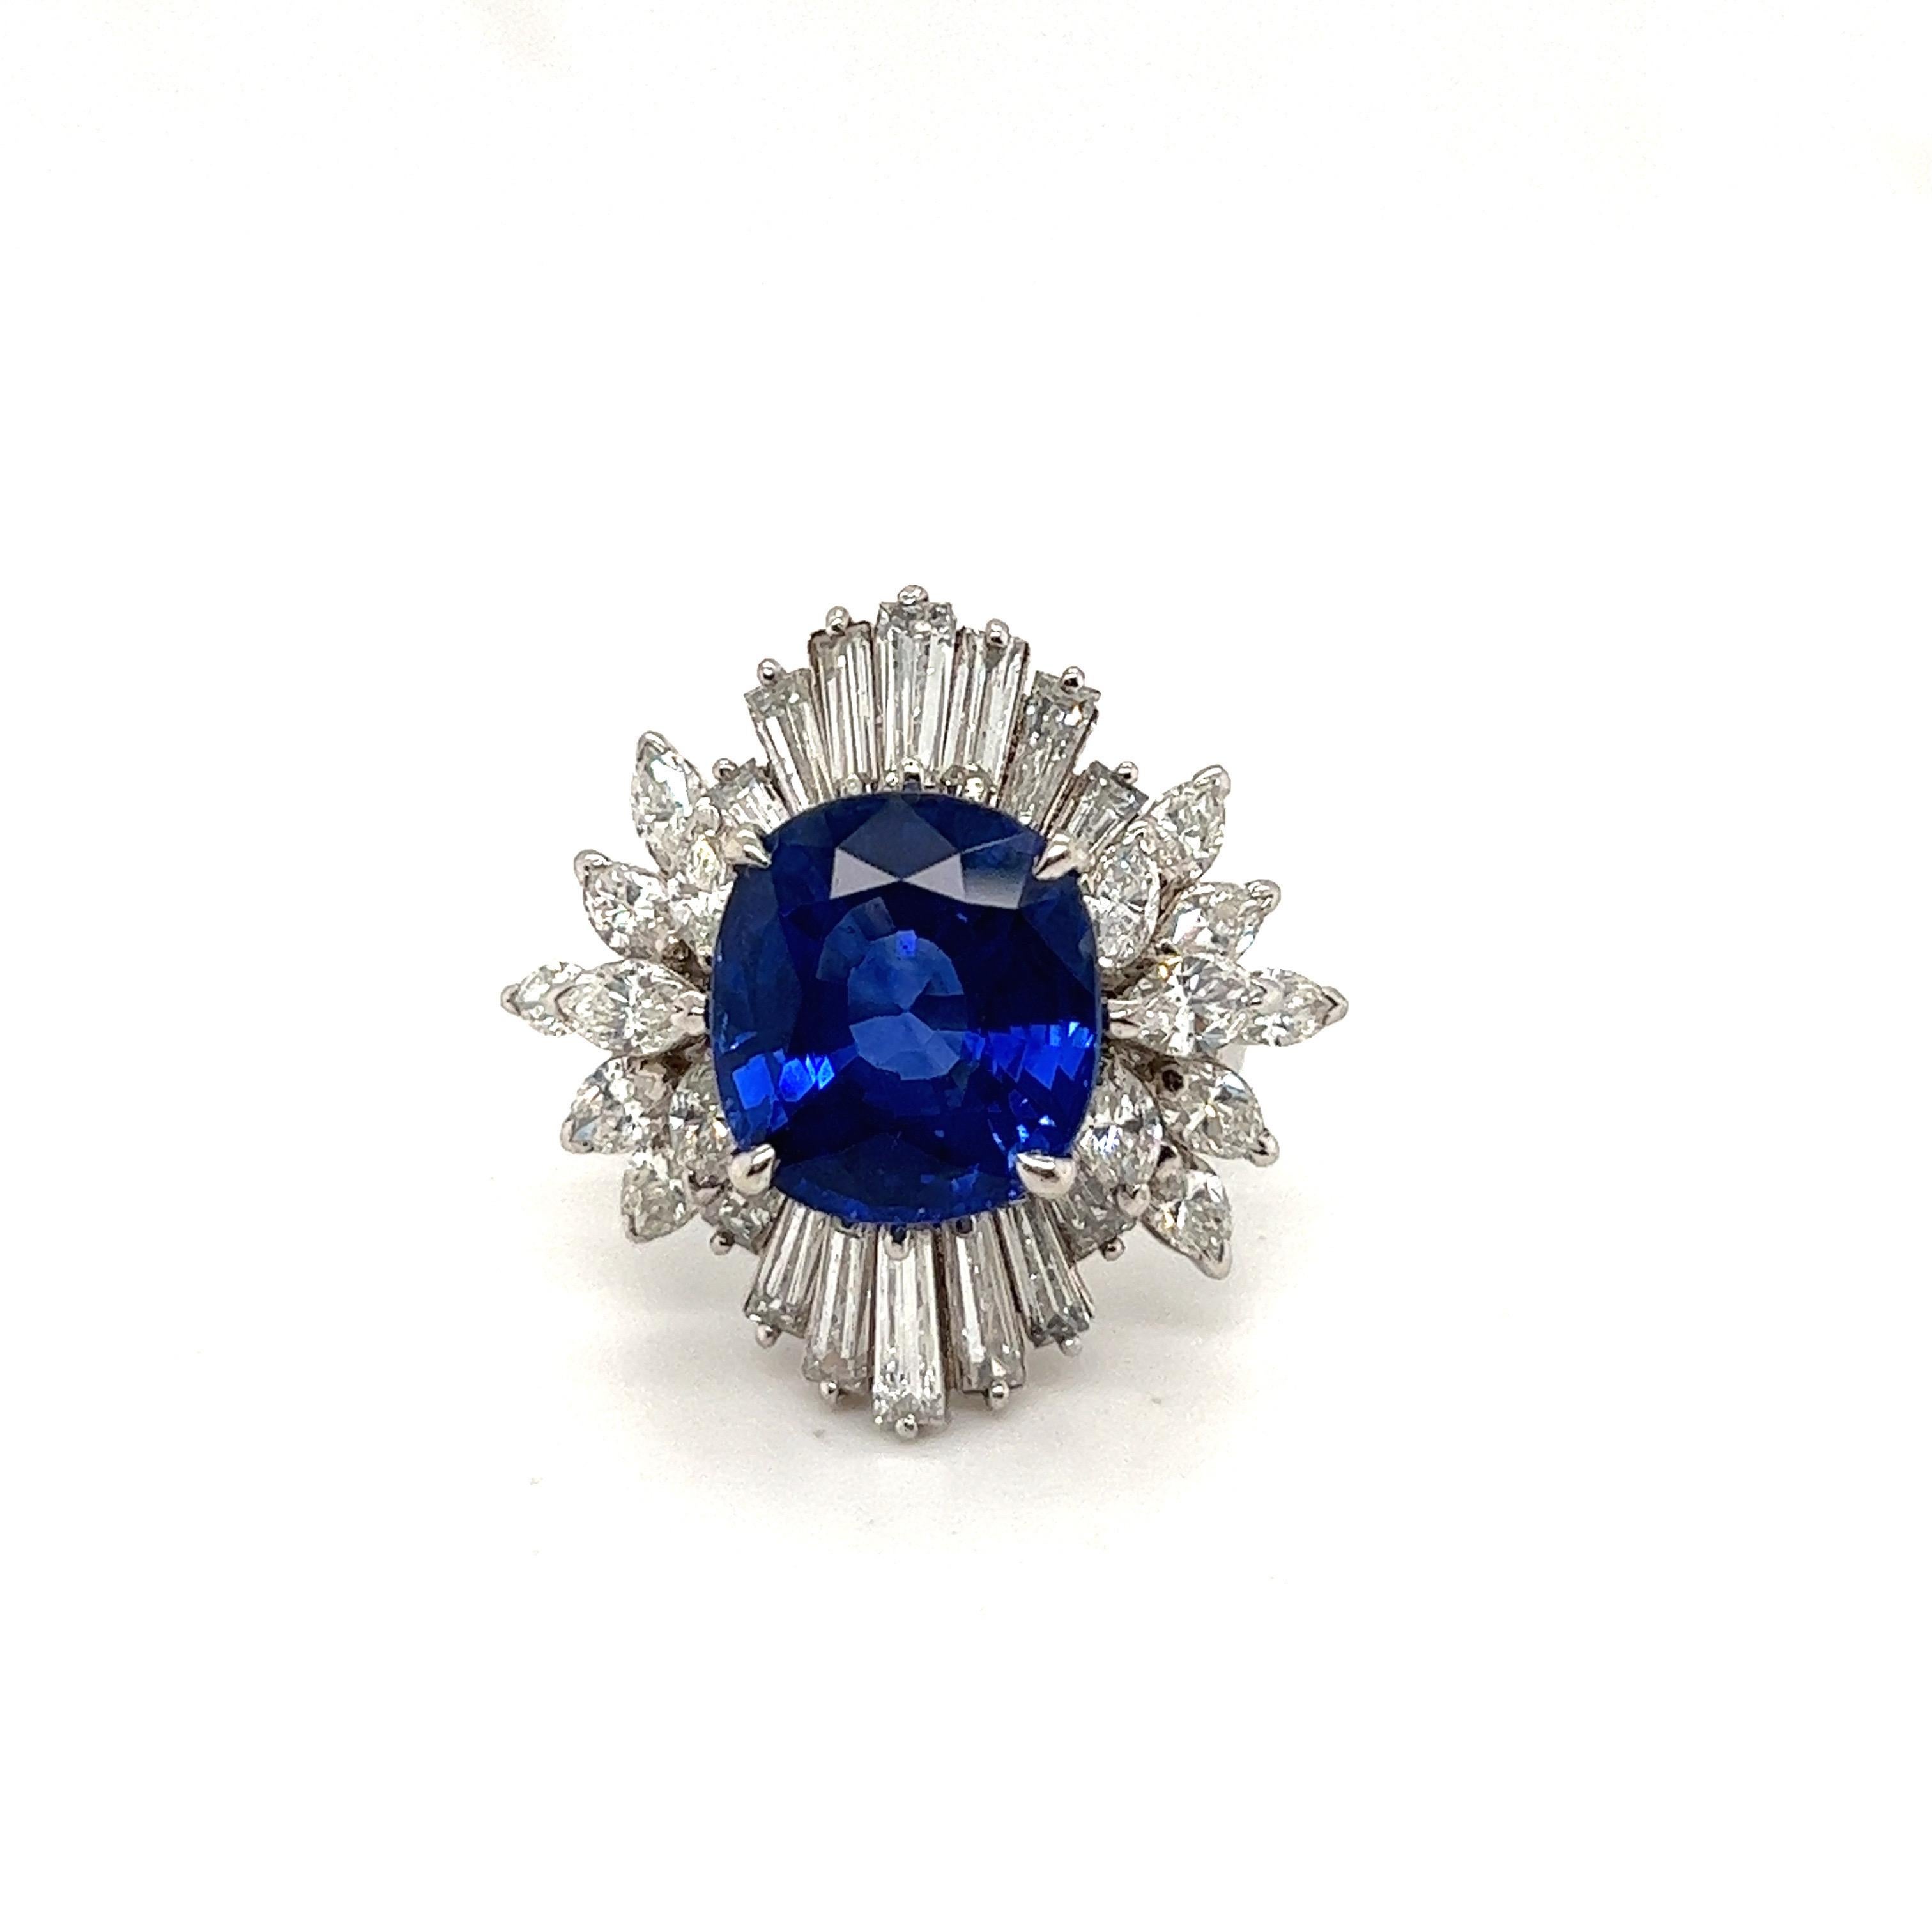 8.87 Carats Madagascar Sapphire Diamond 18 Karat White Gold Cocktail Ring In Good Condition For Sale In Zurich, CH